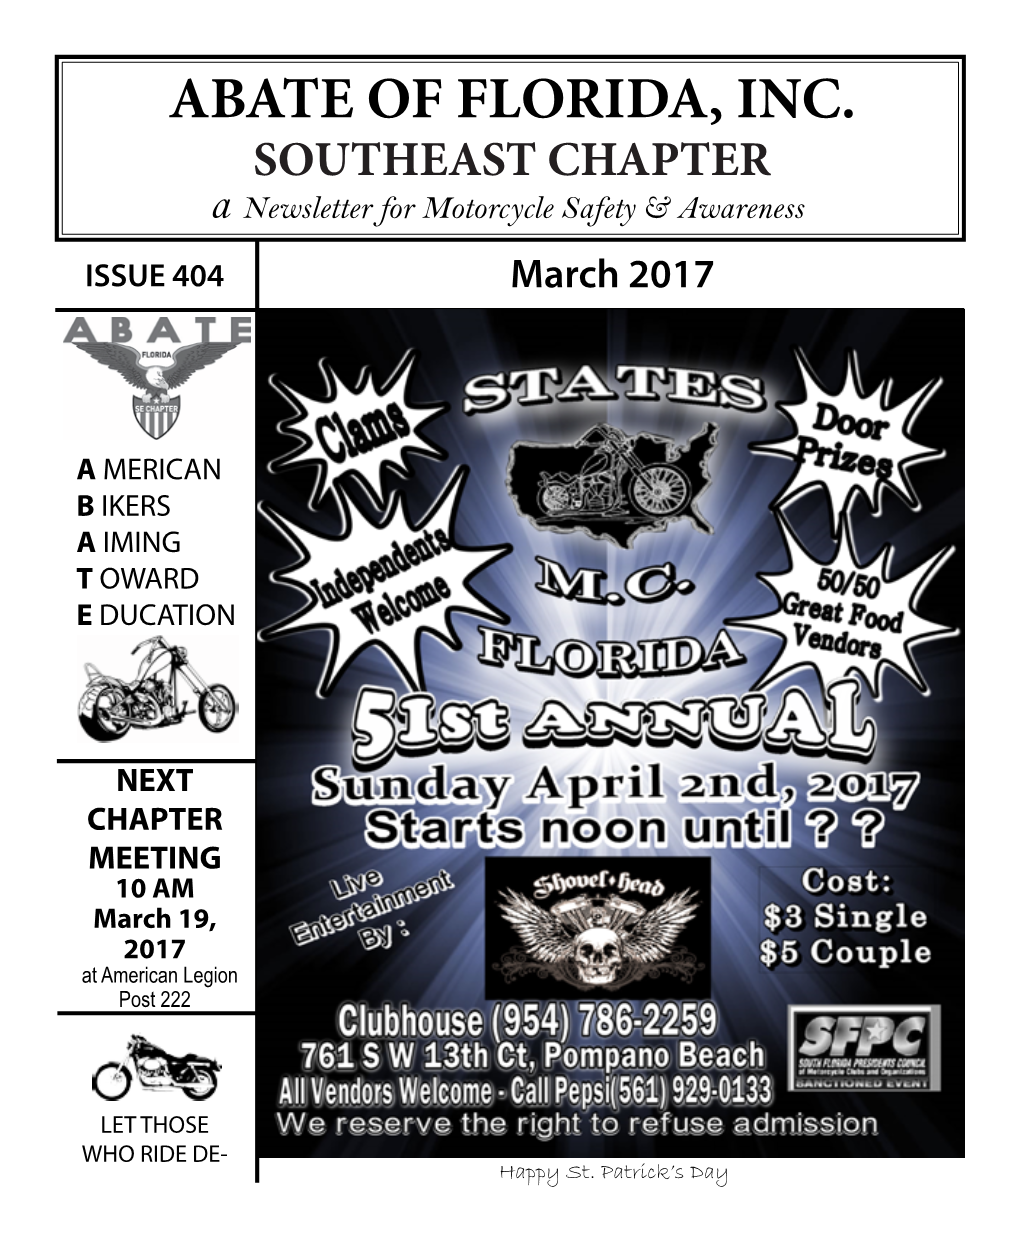 ABATE of FLORIDA, INC. SOUTHEAST CHAPTER a Newsletter for Motorcycle Safety & Awareness ISSUE 404 March 2017